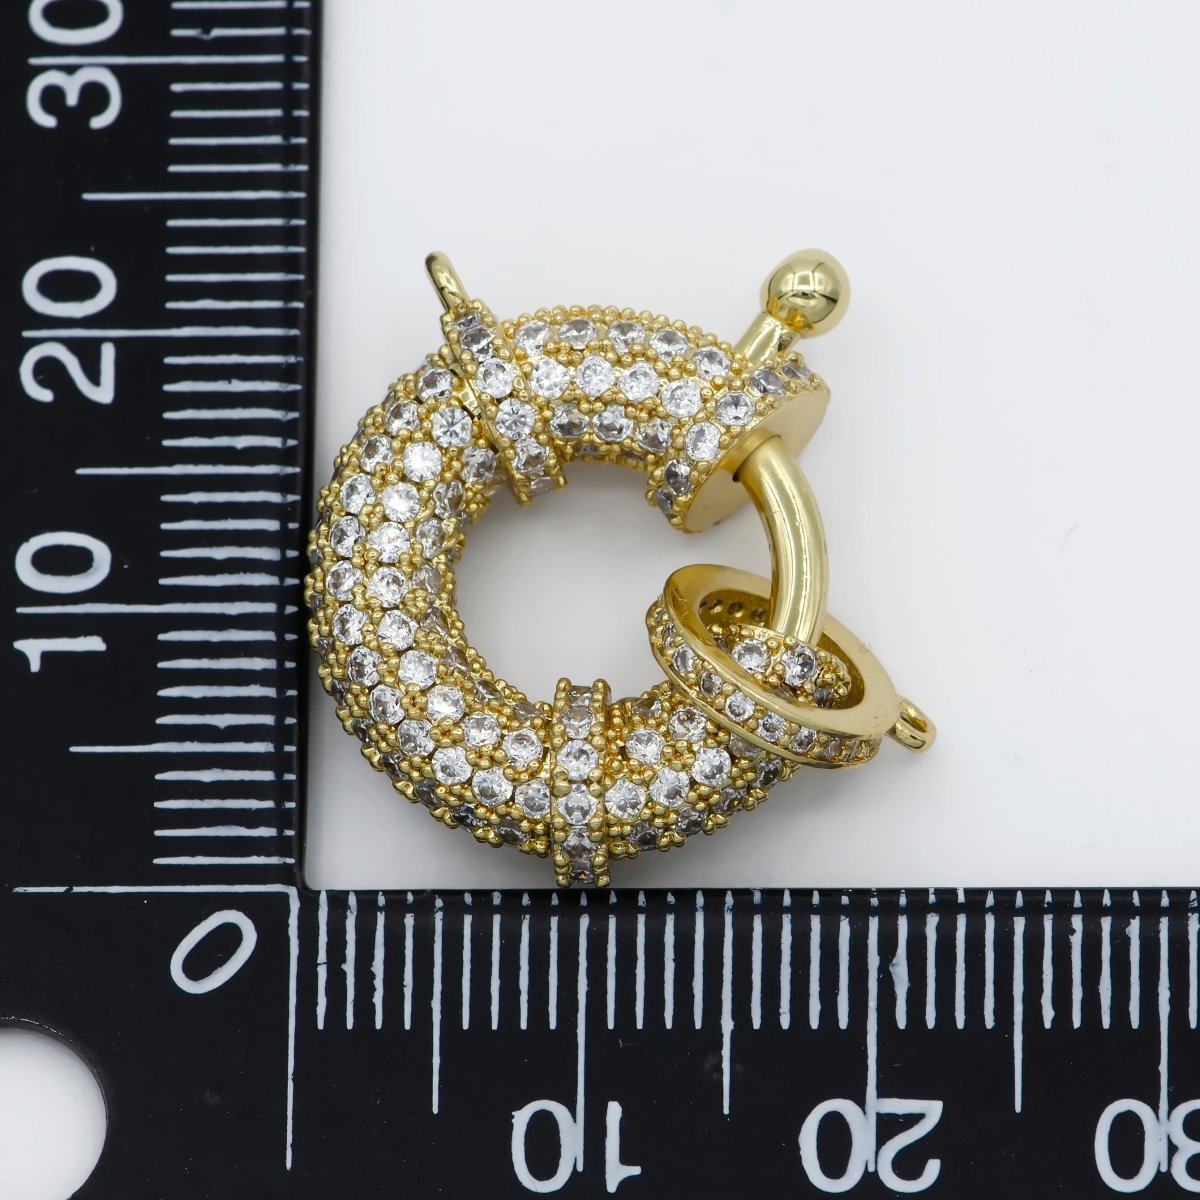 Gold Sailor Clasp CZ Gold Filled Push Gate Ring Charm For DIY Jewelry Making Necklace Bracelet Anklet L-314 - DLUXCA